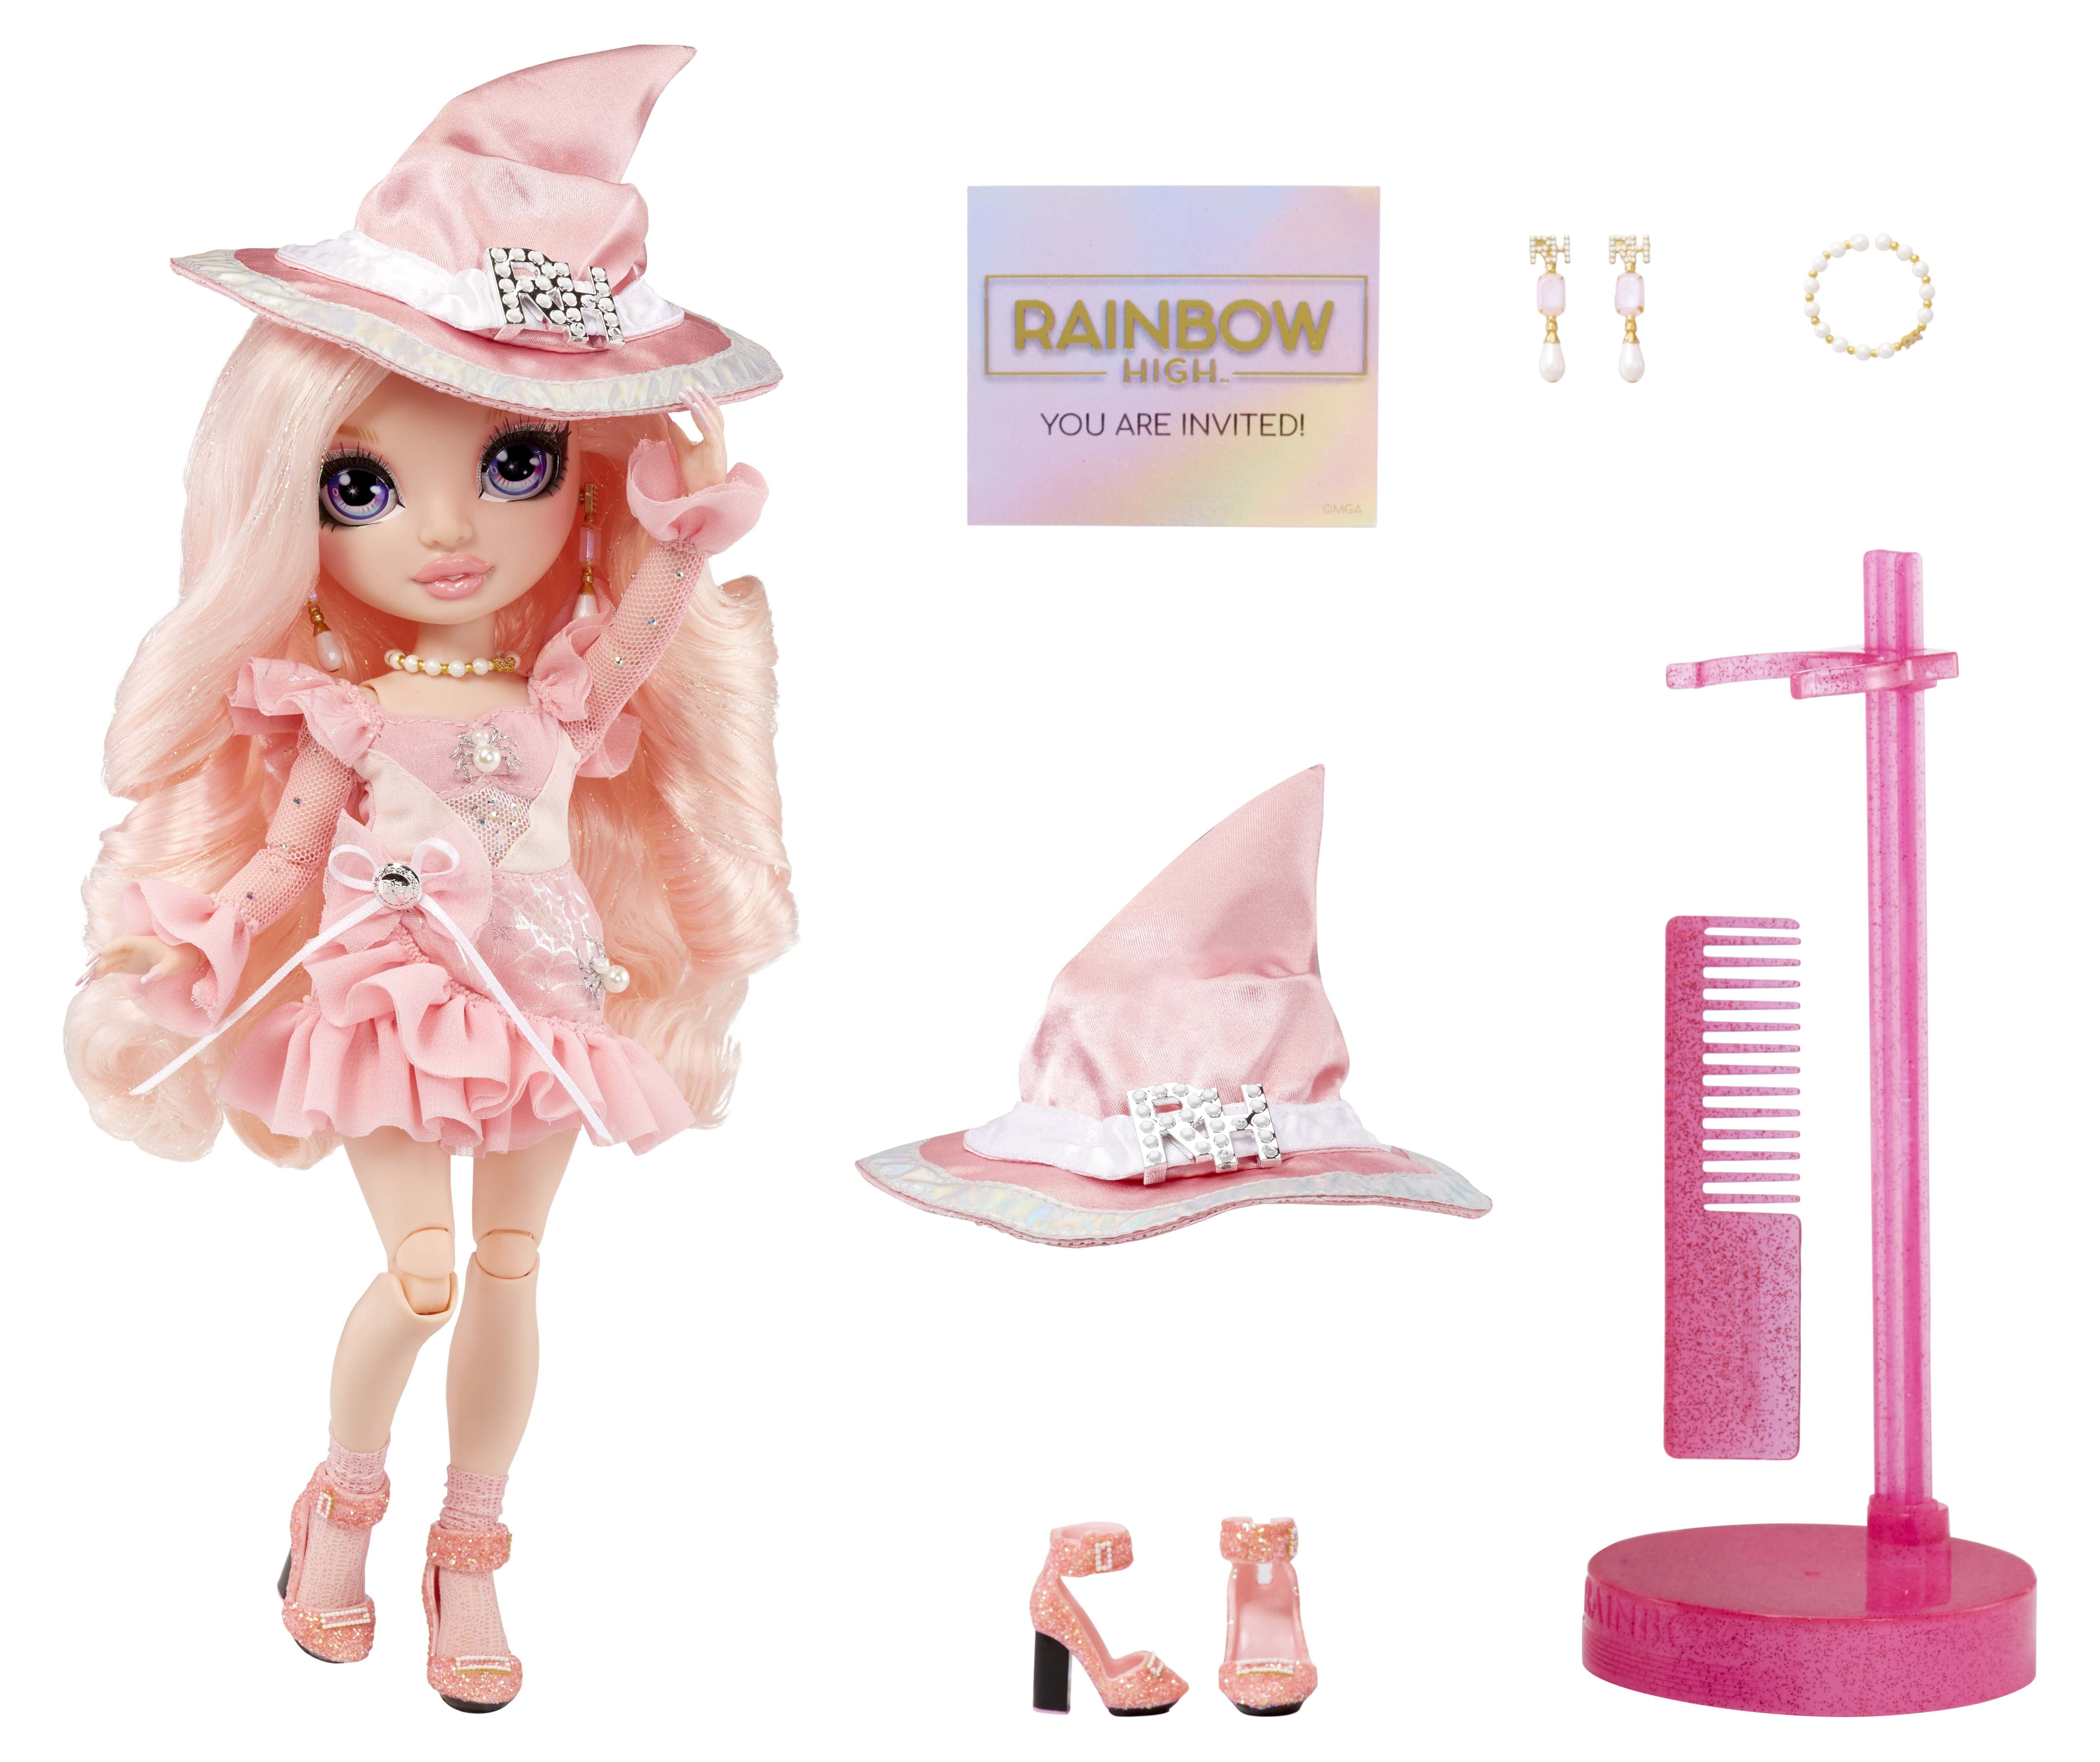 Vision High inch Collectors & for Costume Gift BALL Bella Old Fashion Rainbow Accessories. – COSTUME Kids Rainbow (Pink) 11 and Doll. Years 6-12 Great Witch Parker